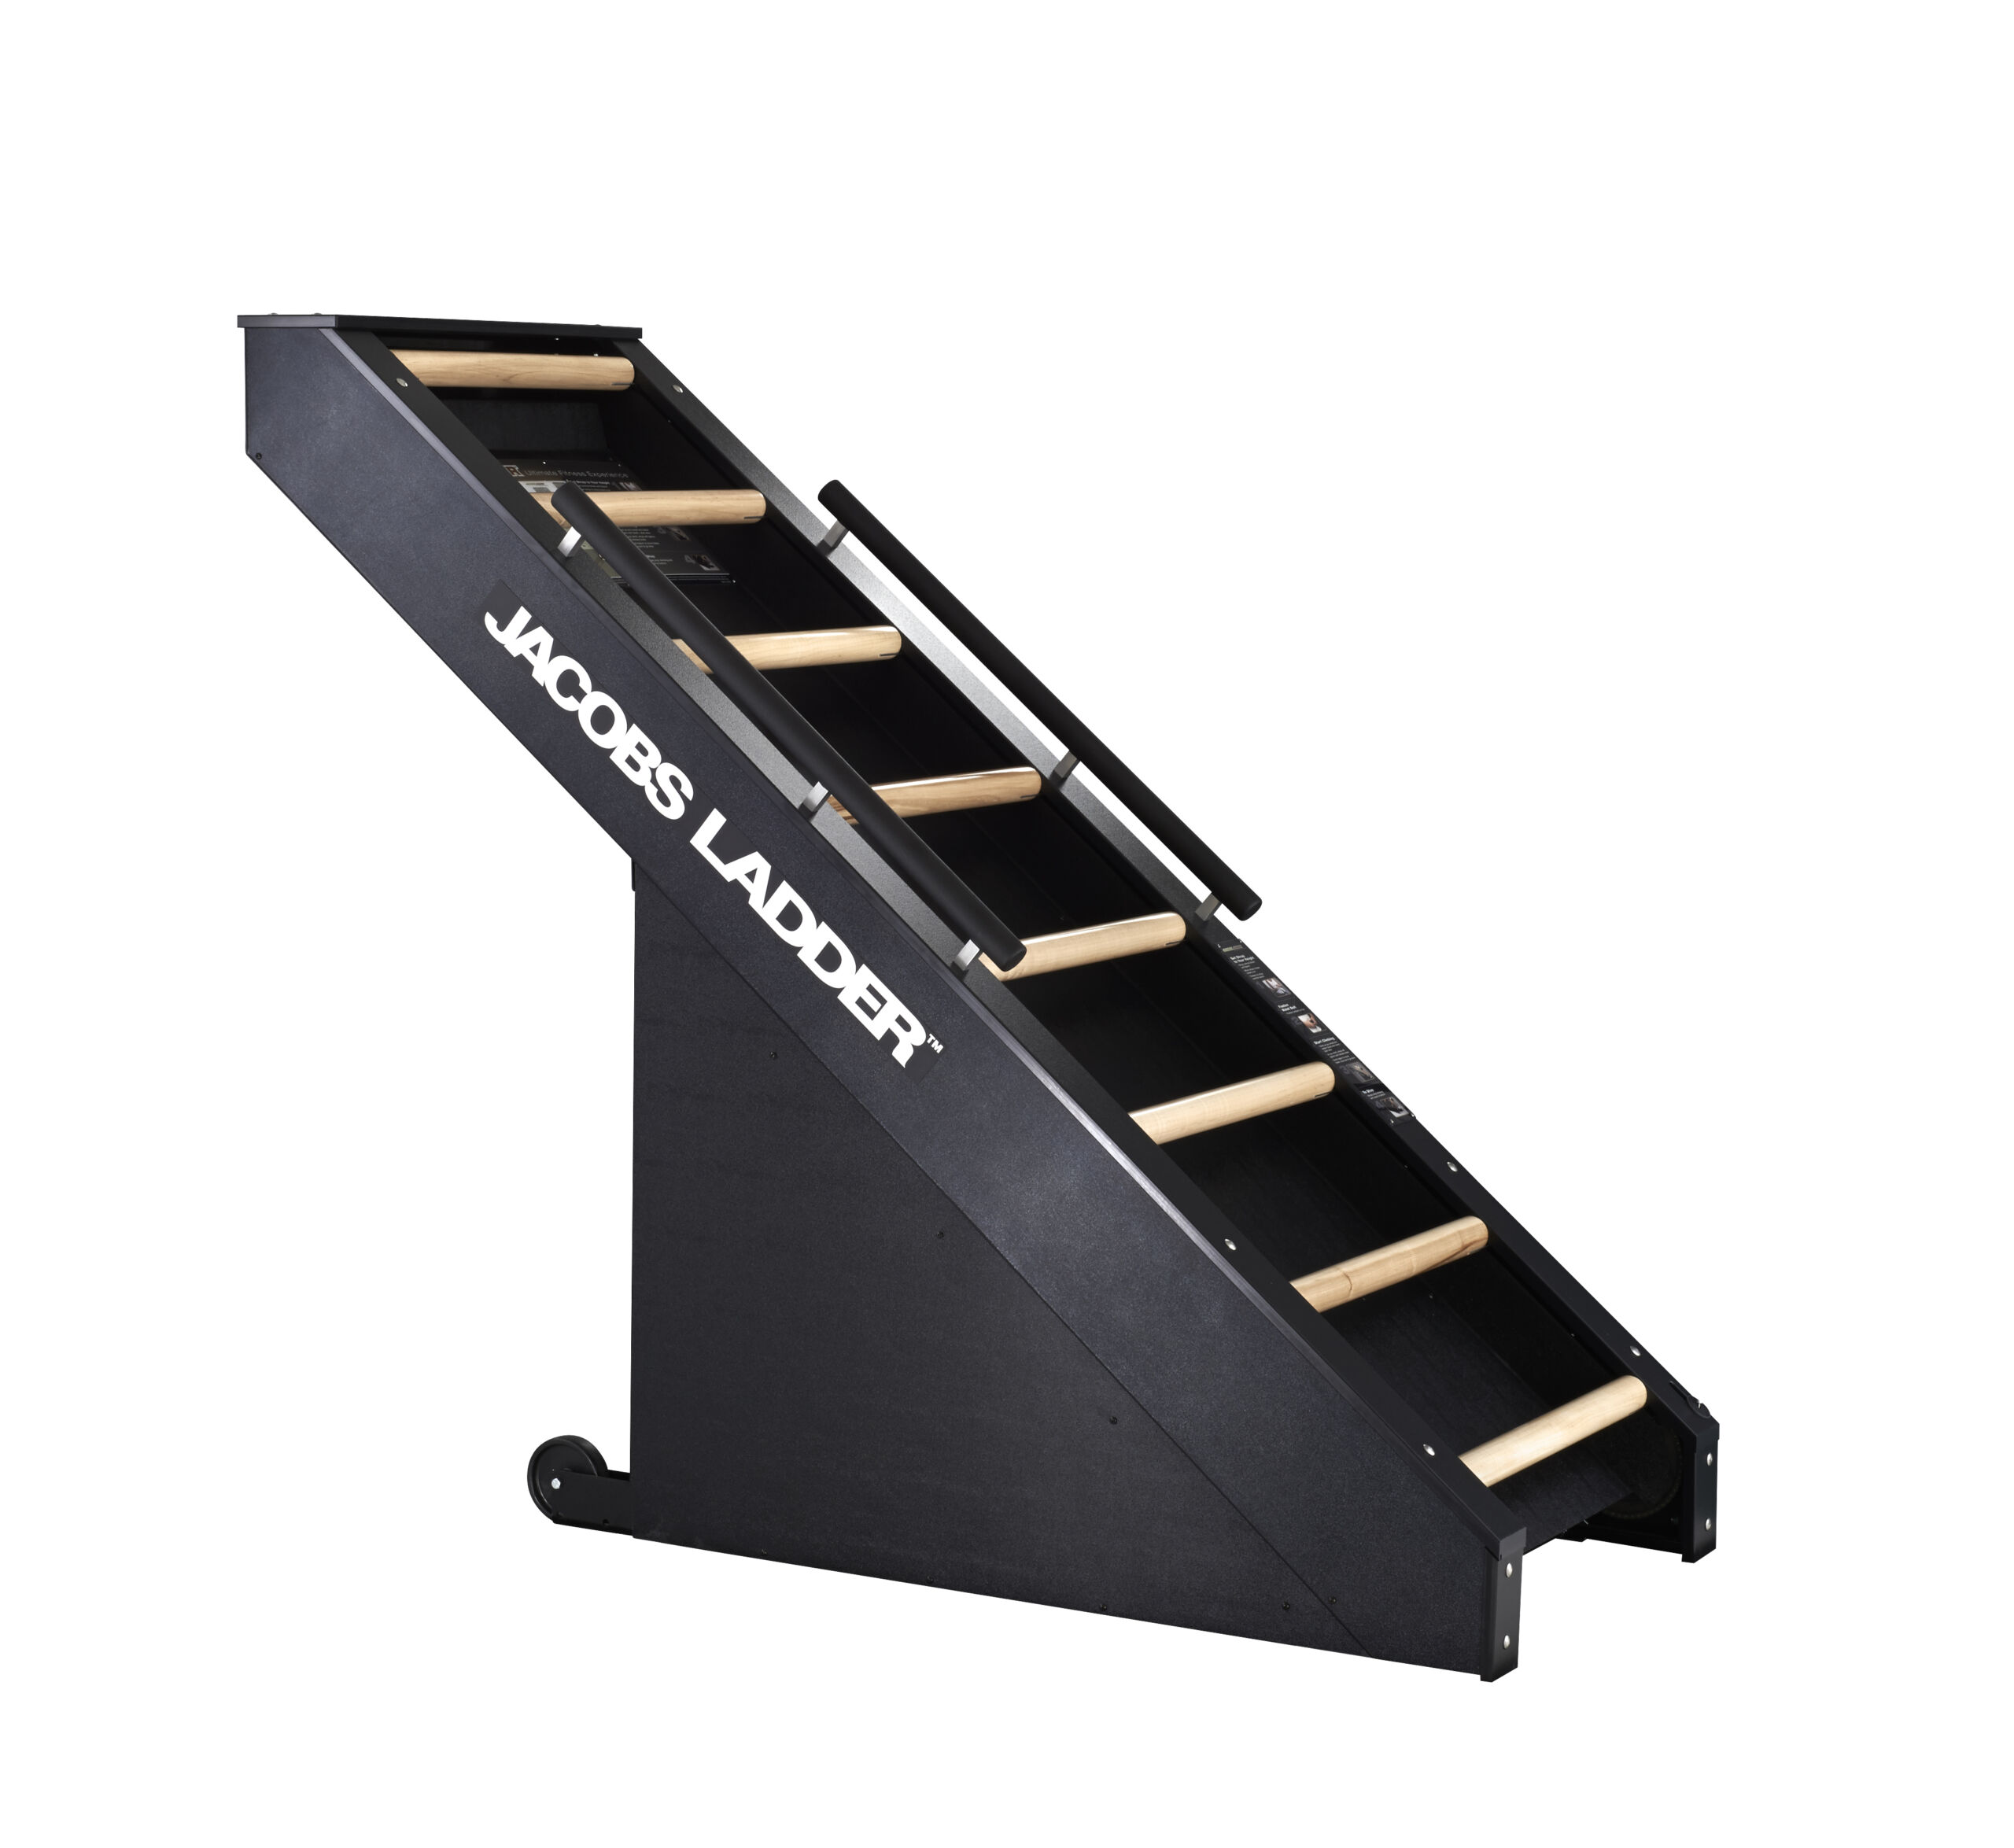 StairMaster Jacobs Ladder JL 1 Product Image